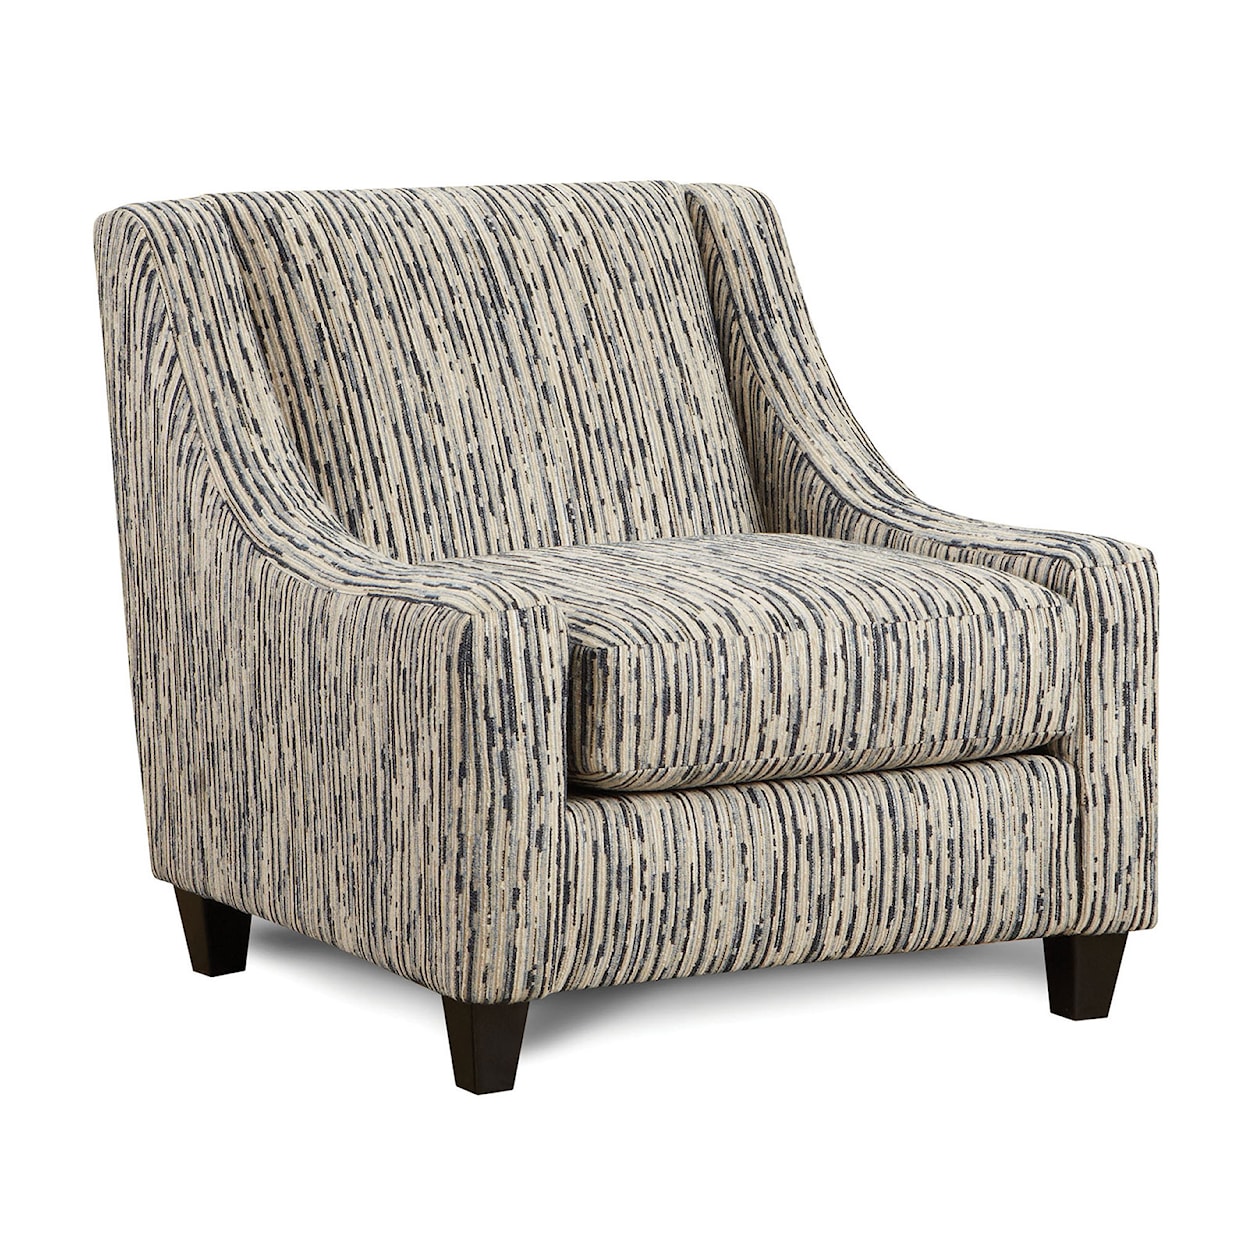 Furniture of America Eastleigh Accent Chair, Striped